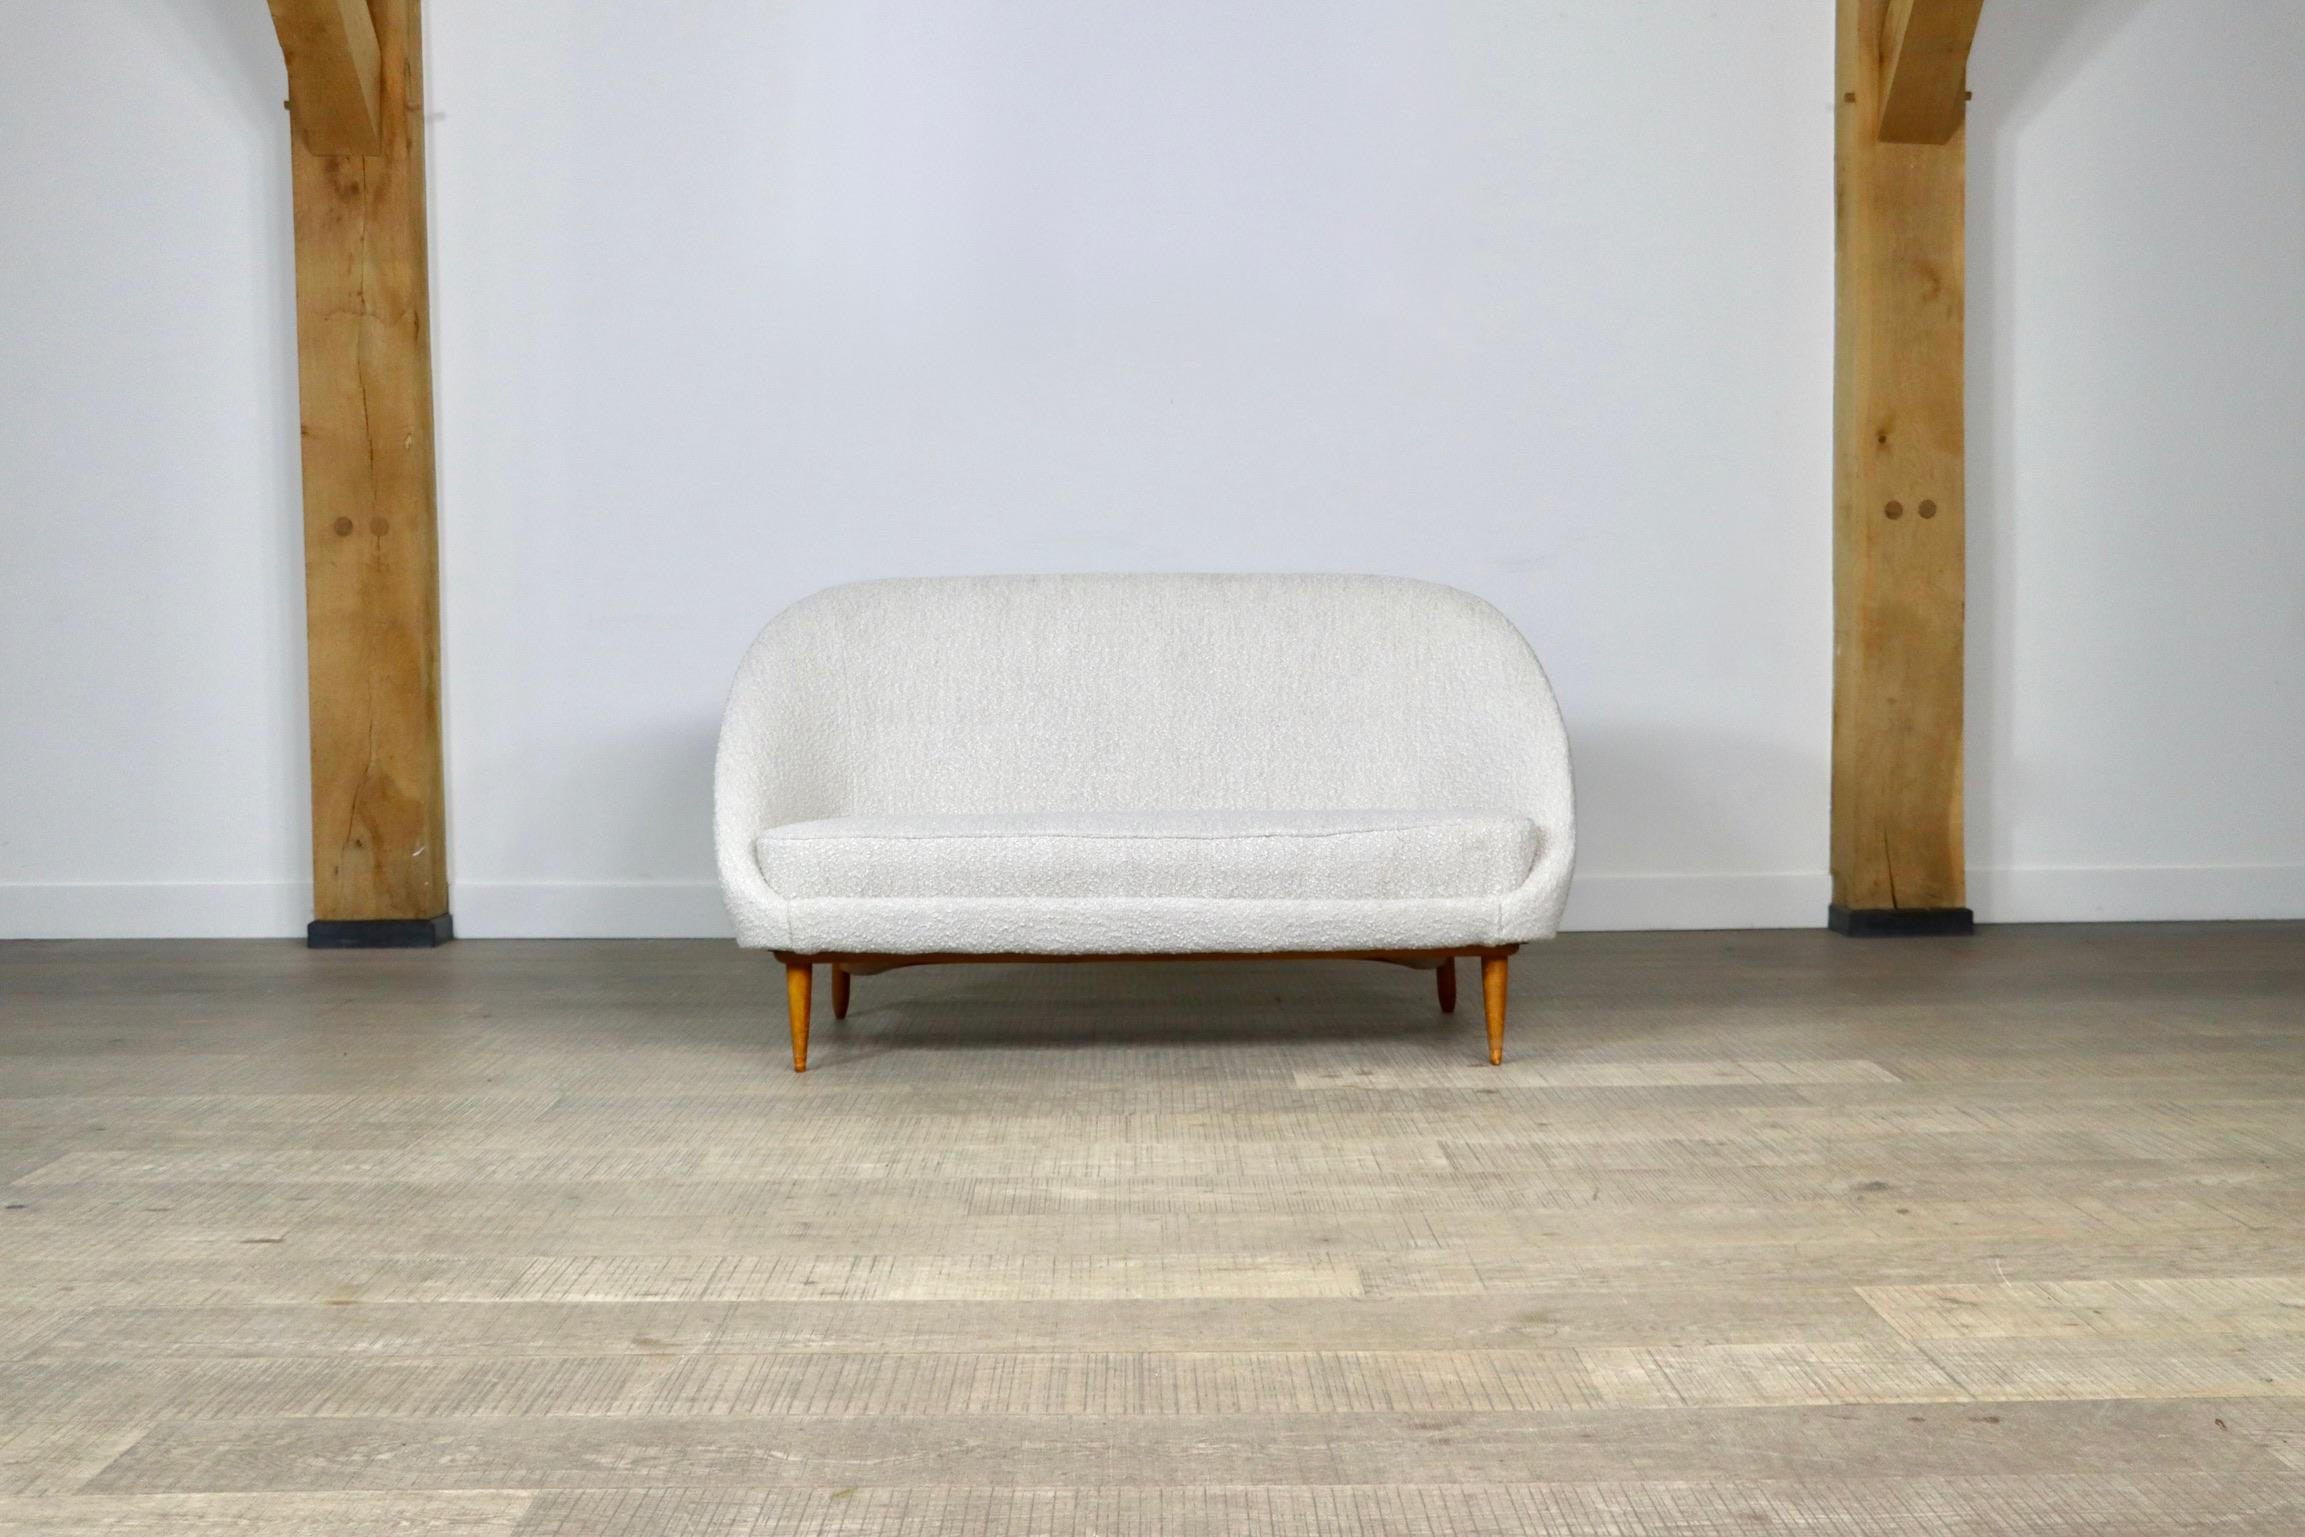 115 Sofa by Theo Ruth for Artifort, Netherlands, 1958. This piece is a rare, sophisticated center-piece. The sofa is upholstered in a beautiful high quality bouclé in a beige/cream colour which combines very well with the warm oak frame. This